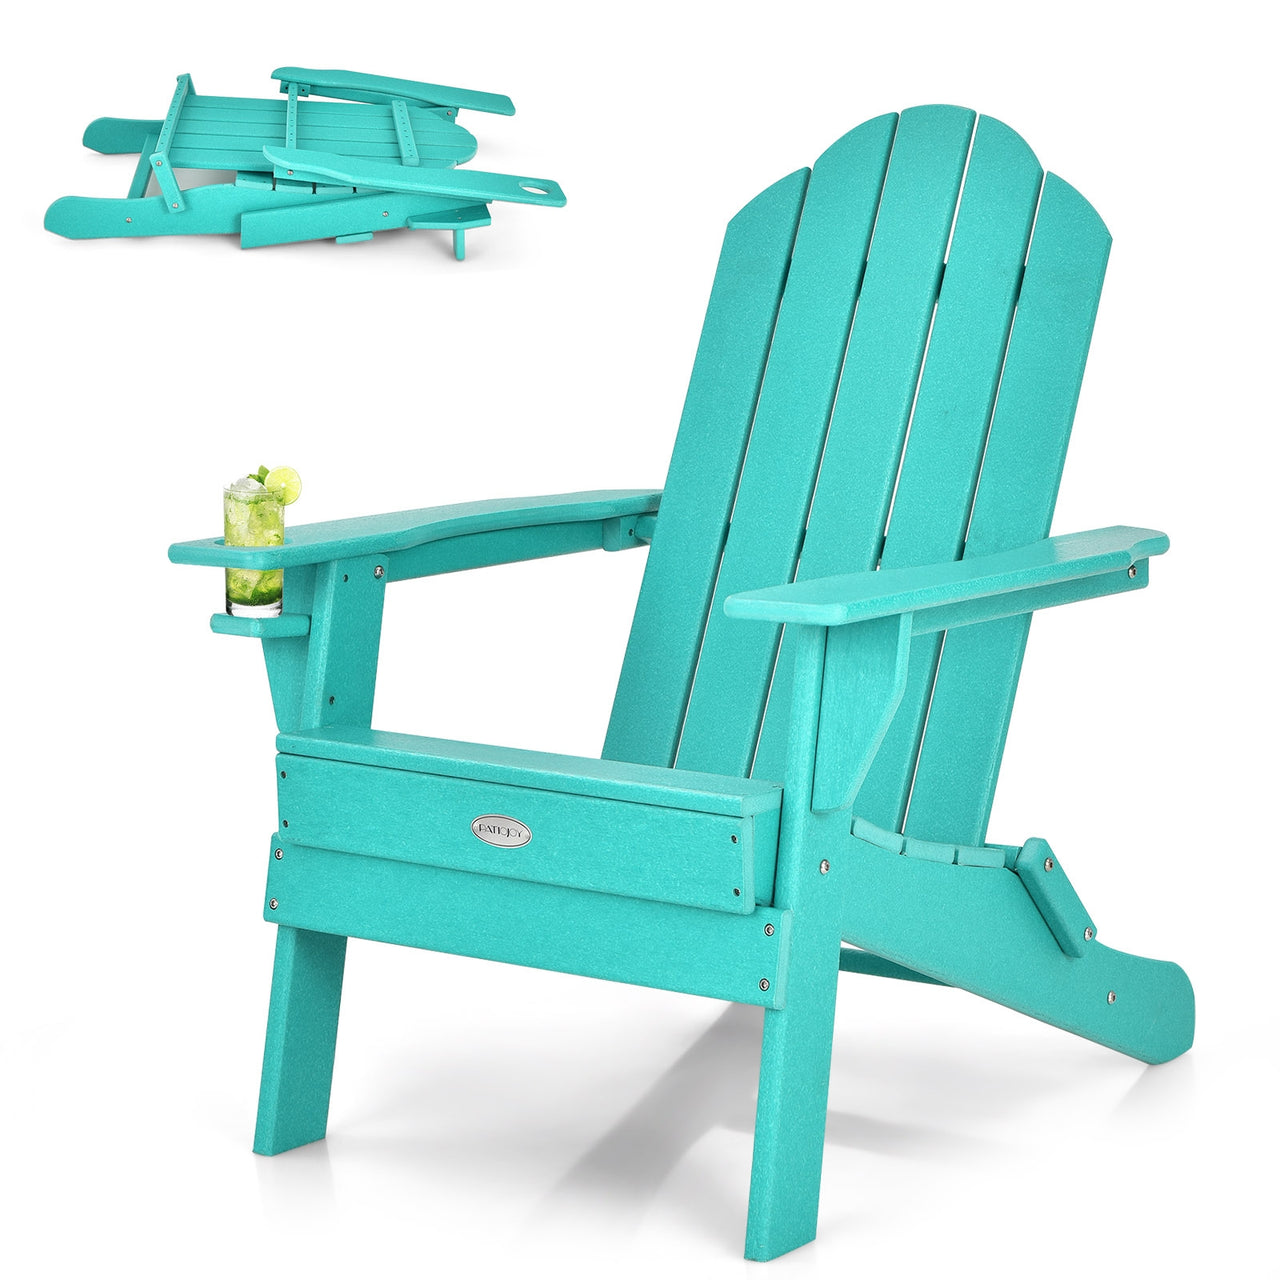 Foldable Weather Resistant Patio Chair with Built-in Cup Holder - Gallery View 4 of 11